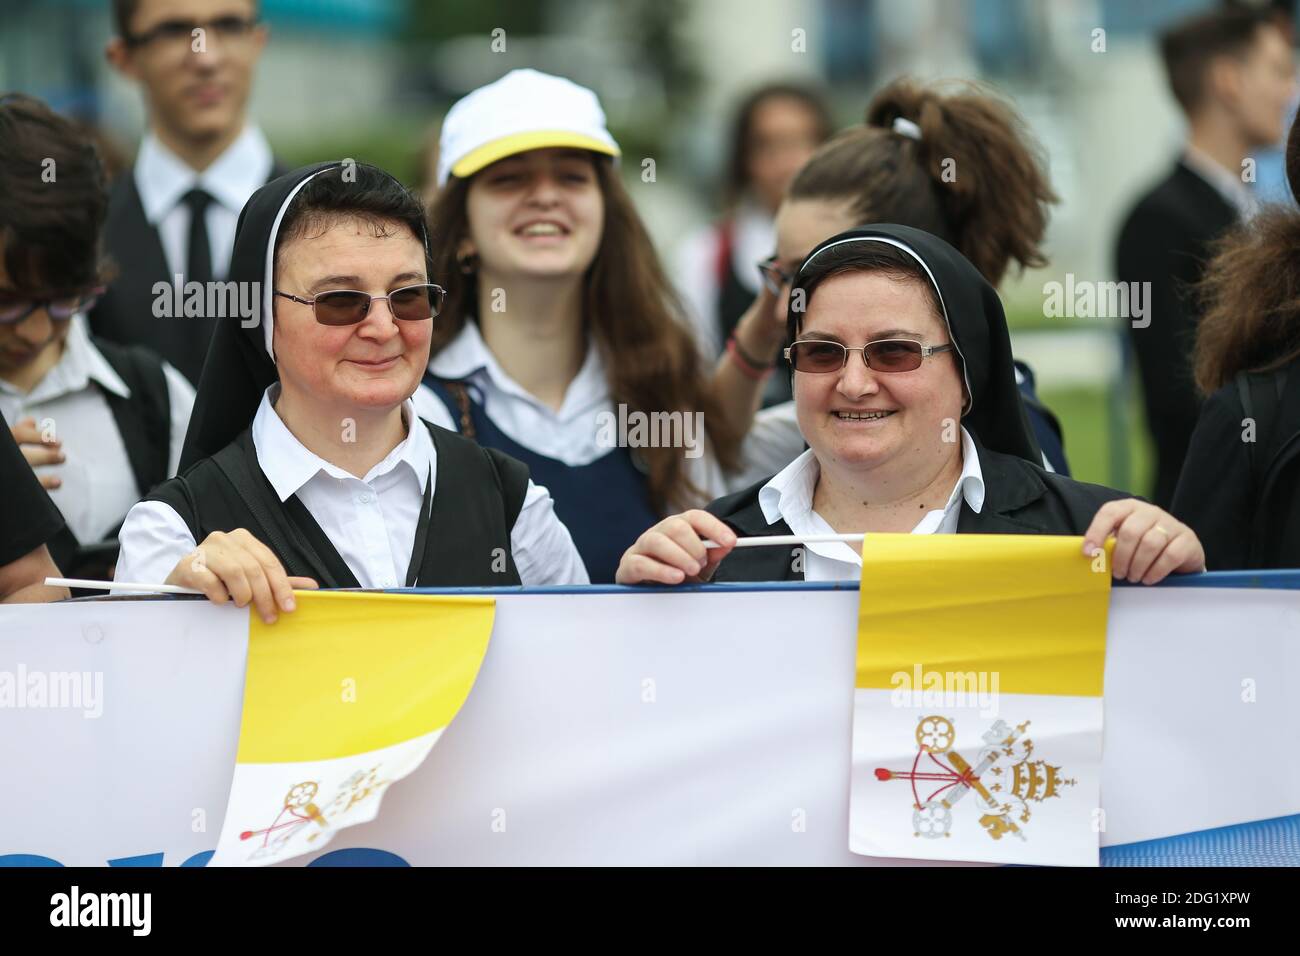 Otopeni, Romania - May 31, 2019: Catholic nuns sing, hold rosaries and Vatican flags while waiting for Pope Francis to come in his first visit in Roma Stock Photo